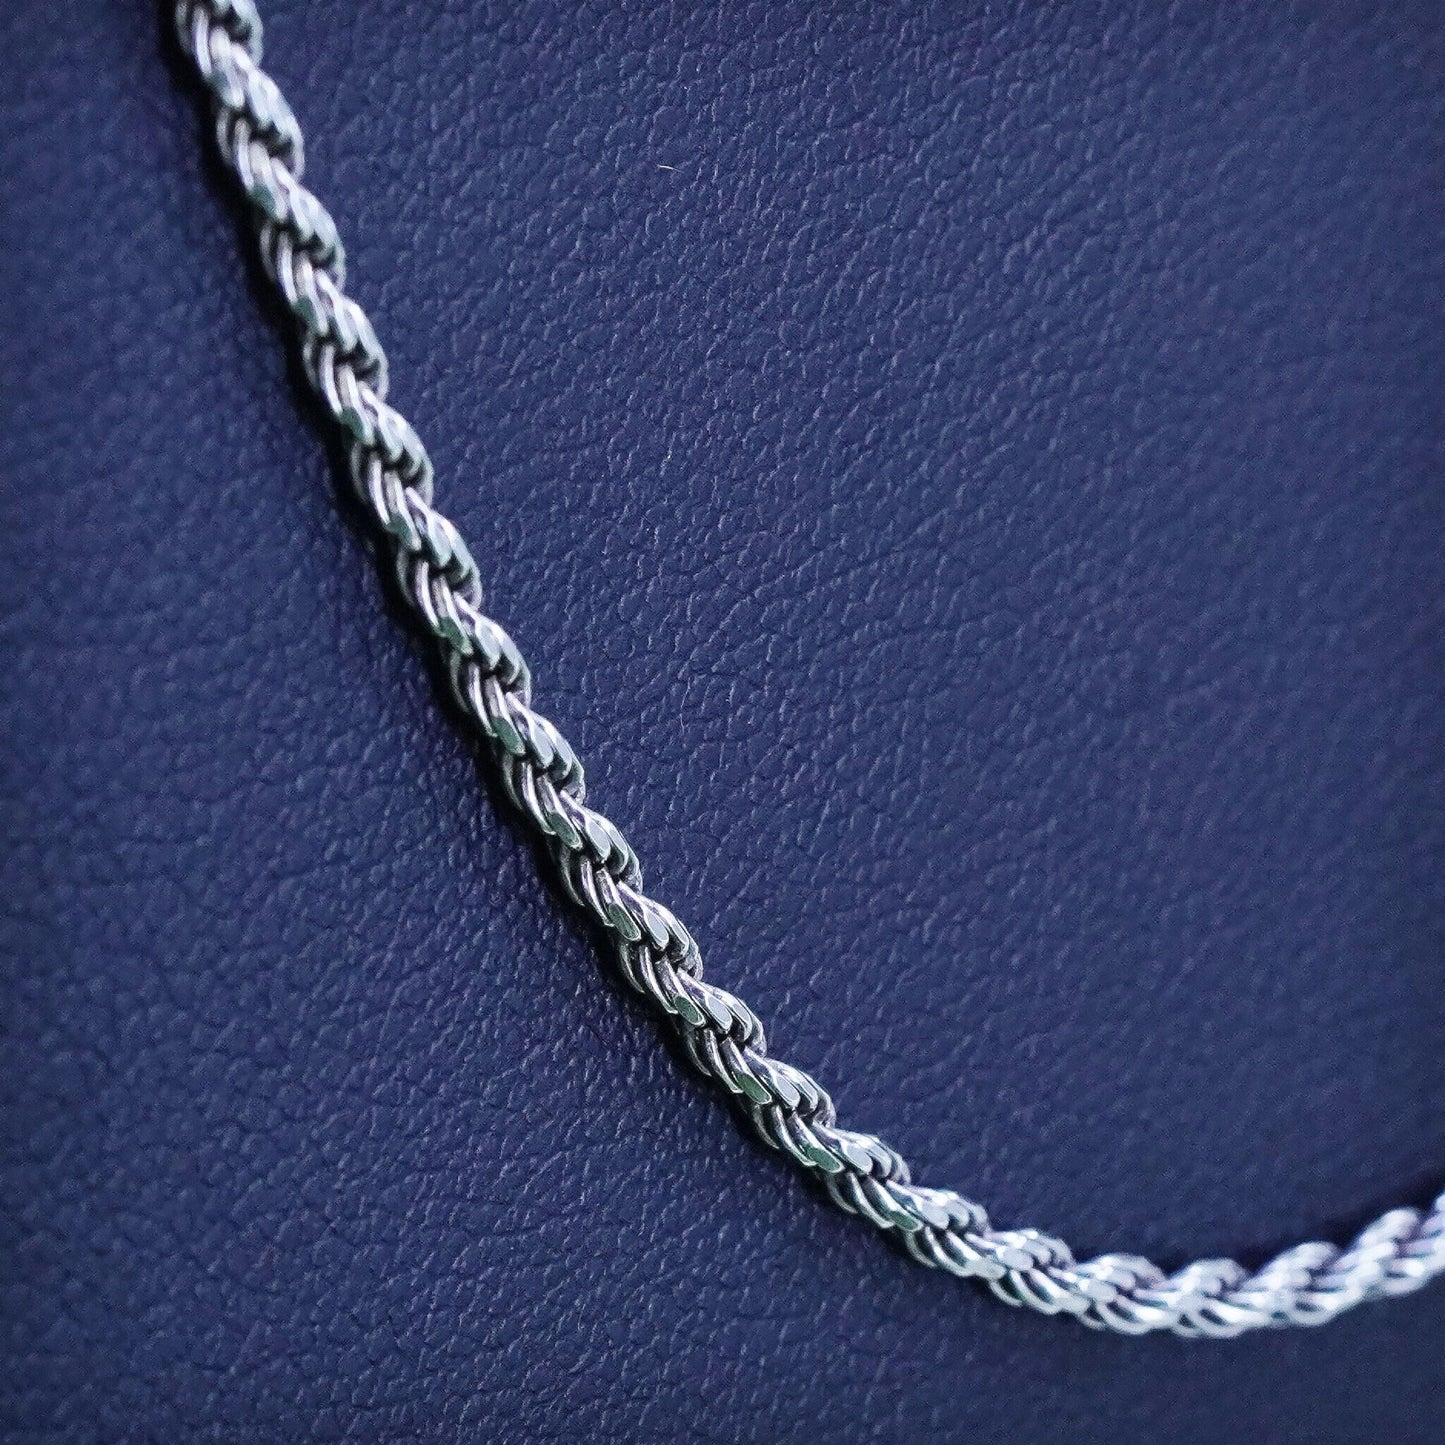 24", 2mm, vintage Italy Sterling silver necklace, 925 diamond cut rope chain